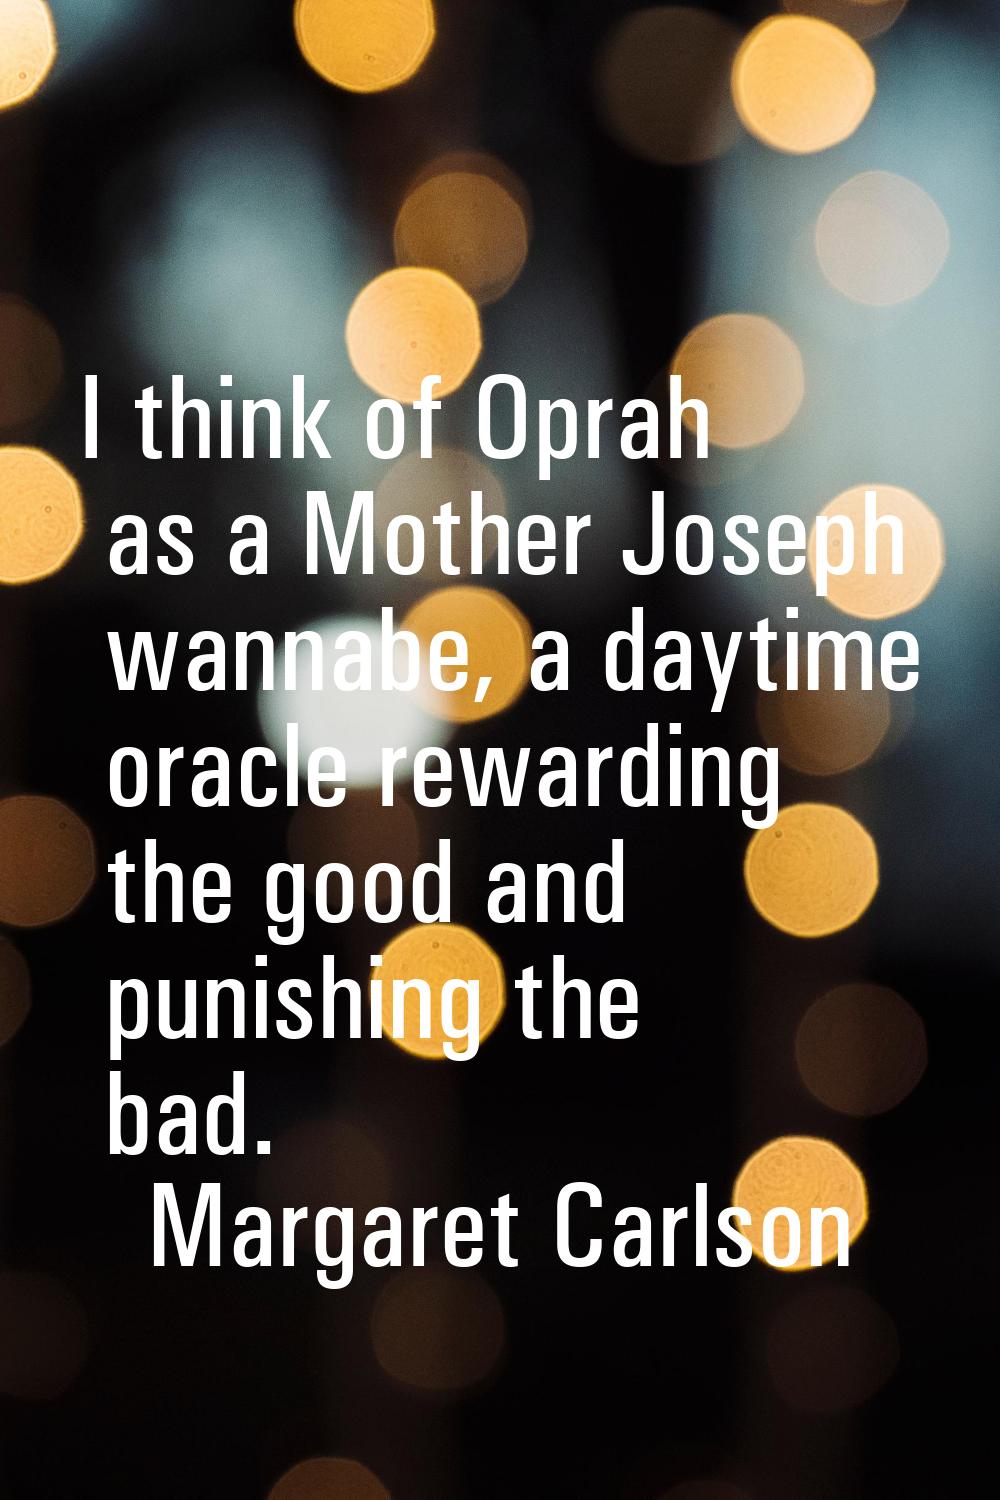 I think of Oprah as a Mother Joseph wannabe, a daytime oracle rewarding the good and punishing the 